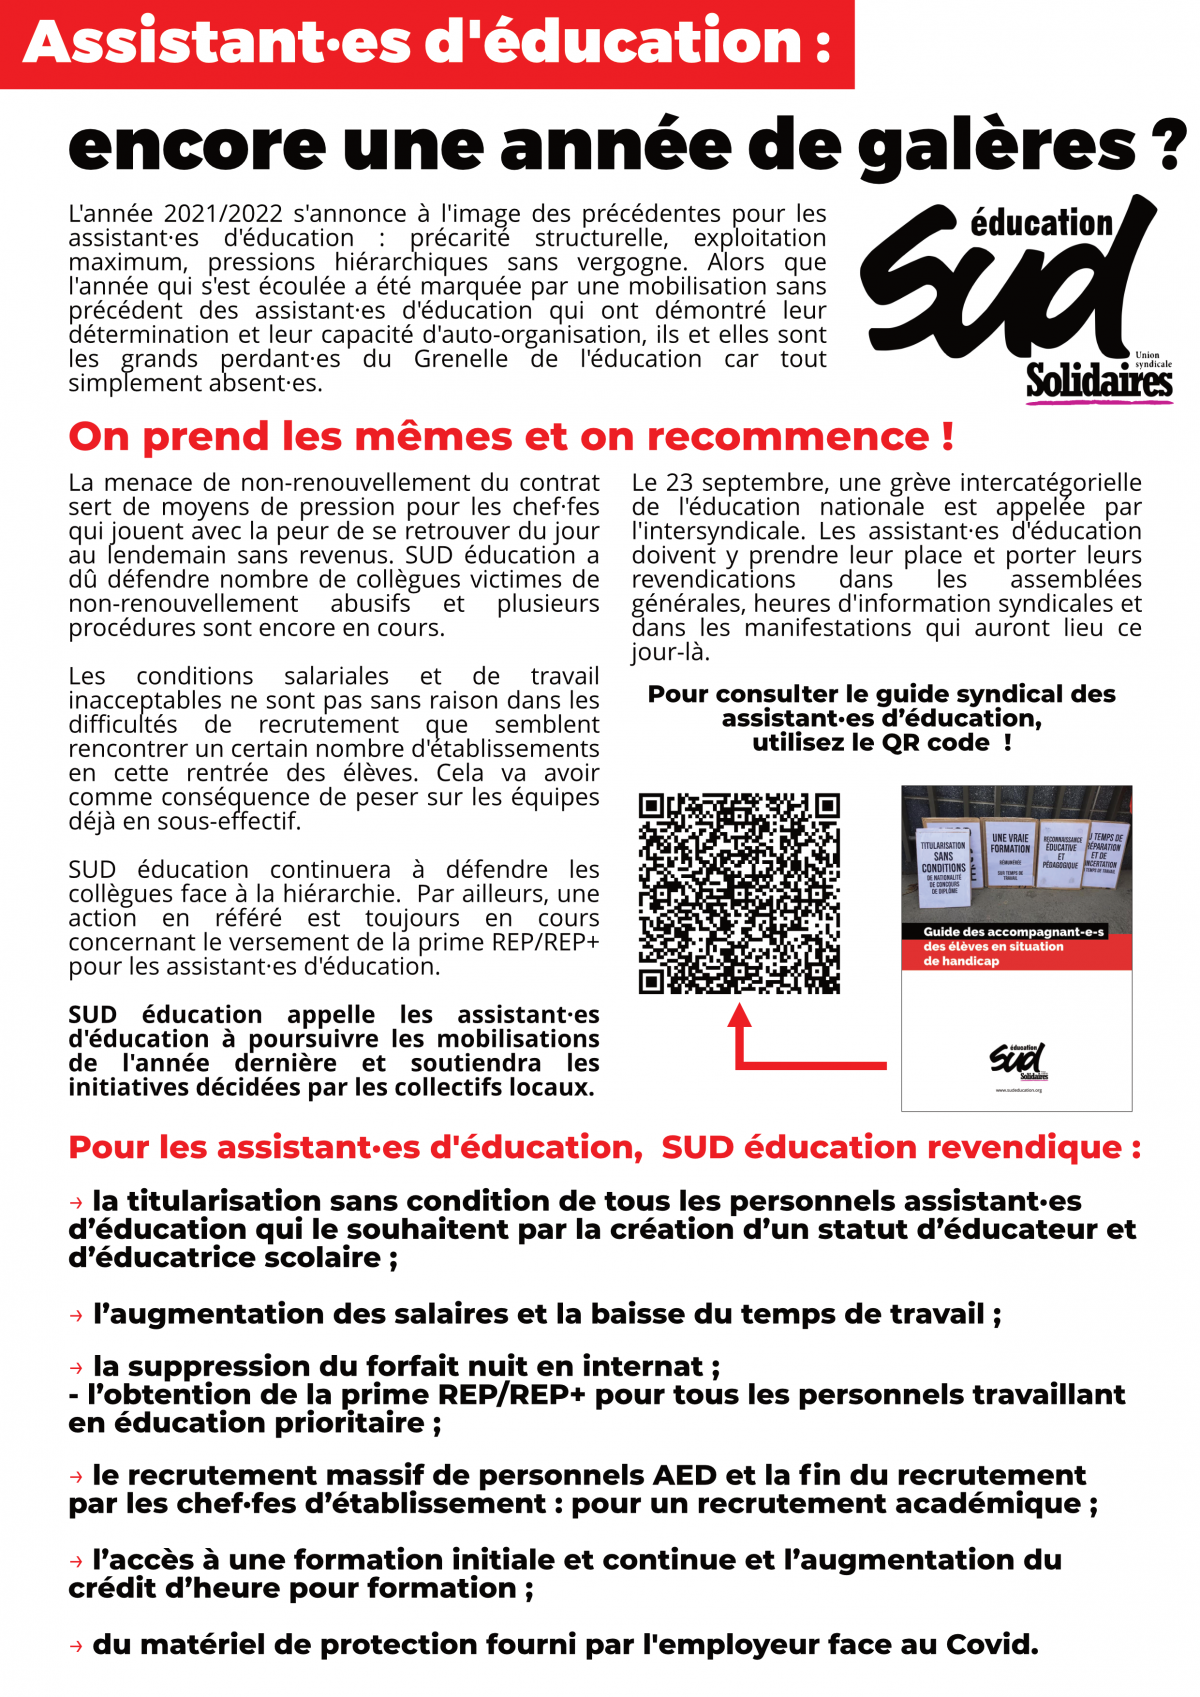 https://www.sudeducation.org/wp-content/uploads/2021/09/tract-AED1.png